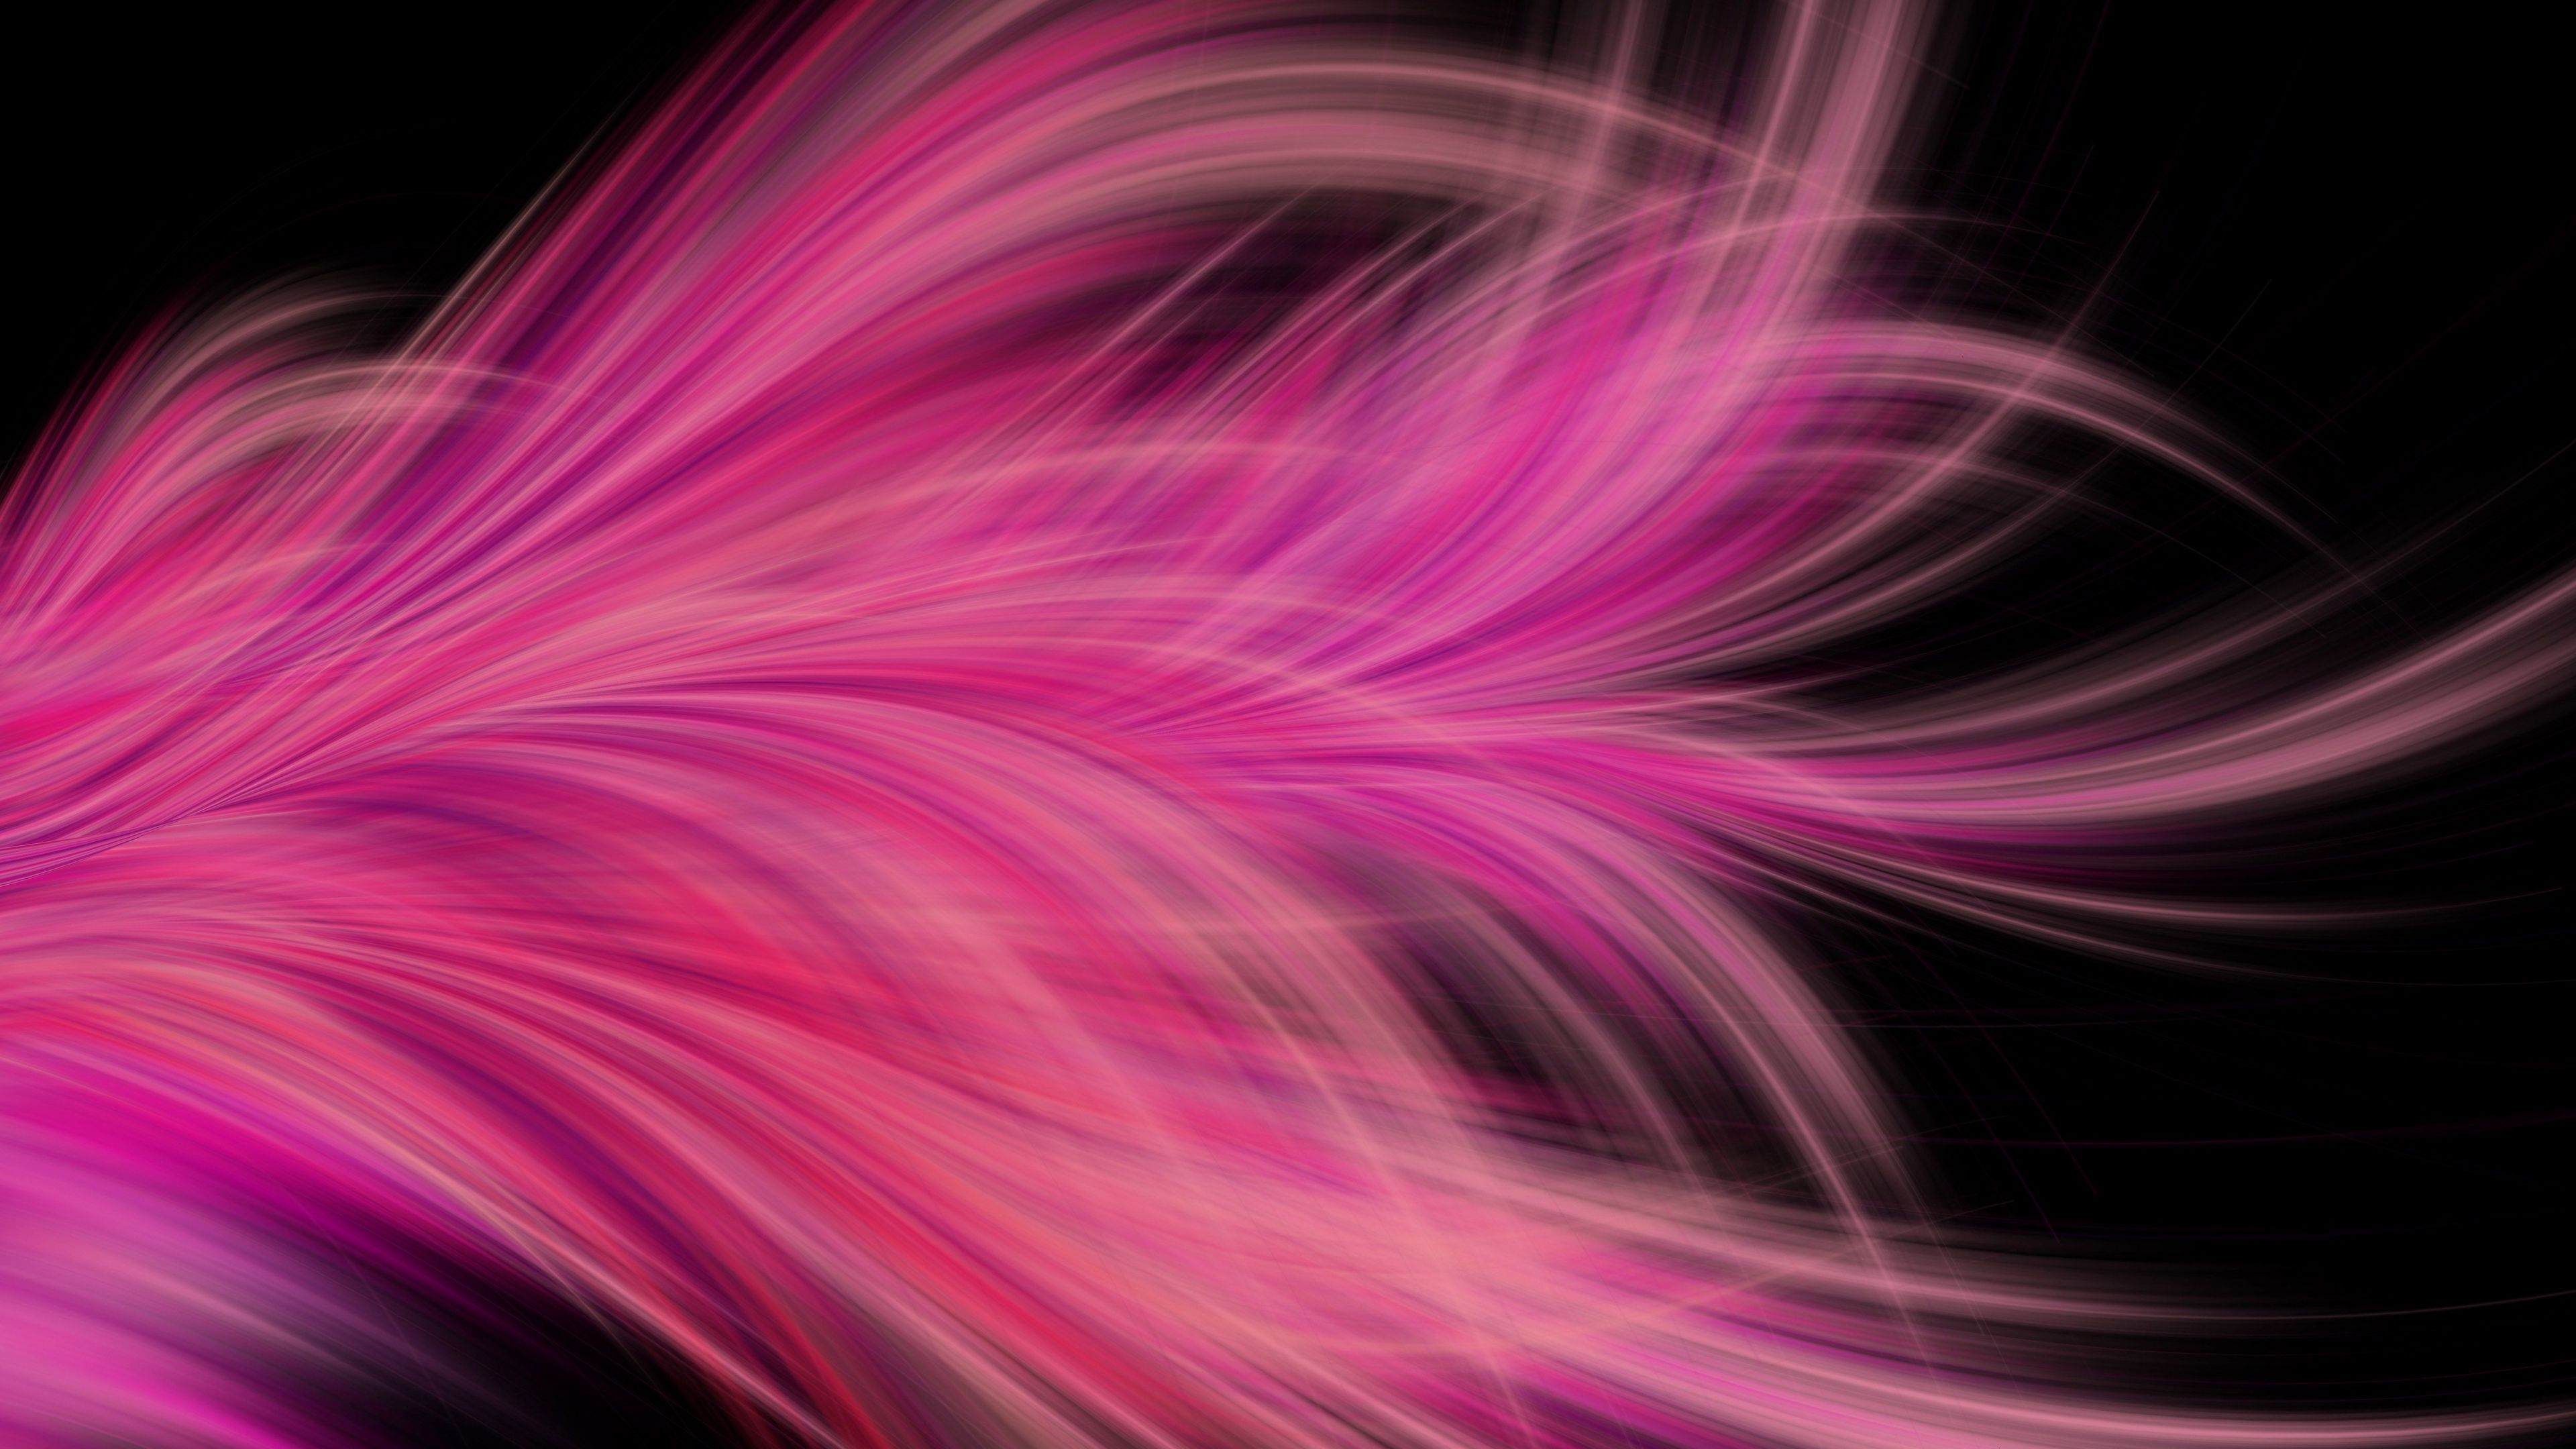 Pink Fractal Abstract Feather Pink Wallpaper, Hd Wallpaper, Feather Wallpaper, Abstract Wallpaper, 5k W. Abstract Wallpaper, Feather Wallpaper, Pink Wallpaper